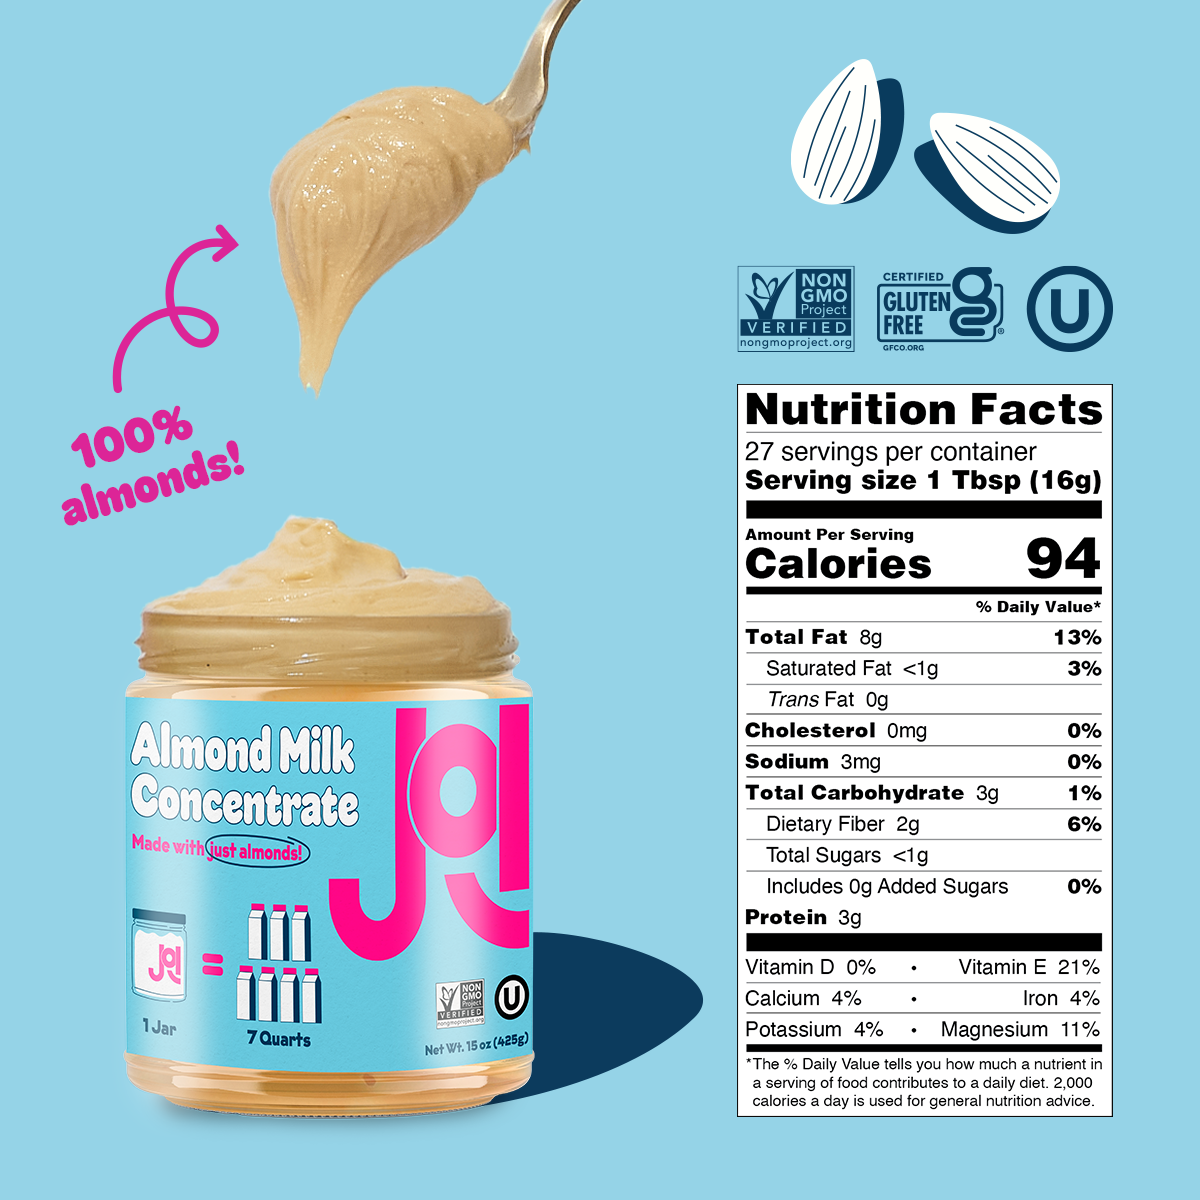 
                  
                    Almond & Cashew Base 4-Pack by JOI
                  
                